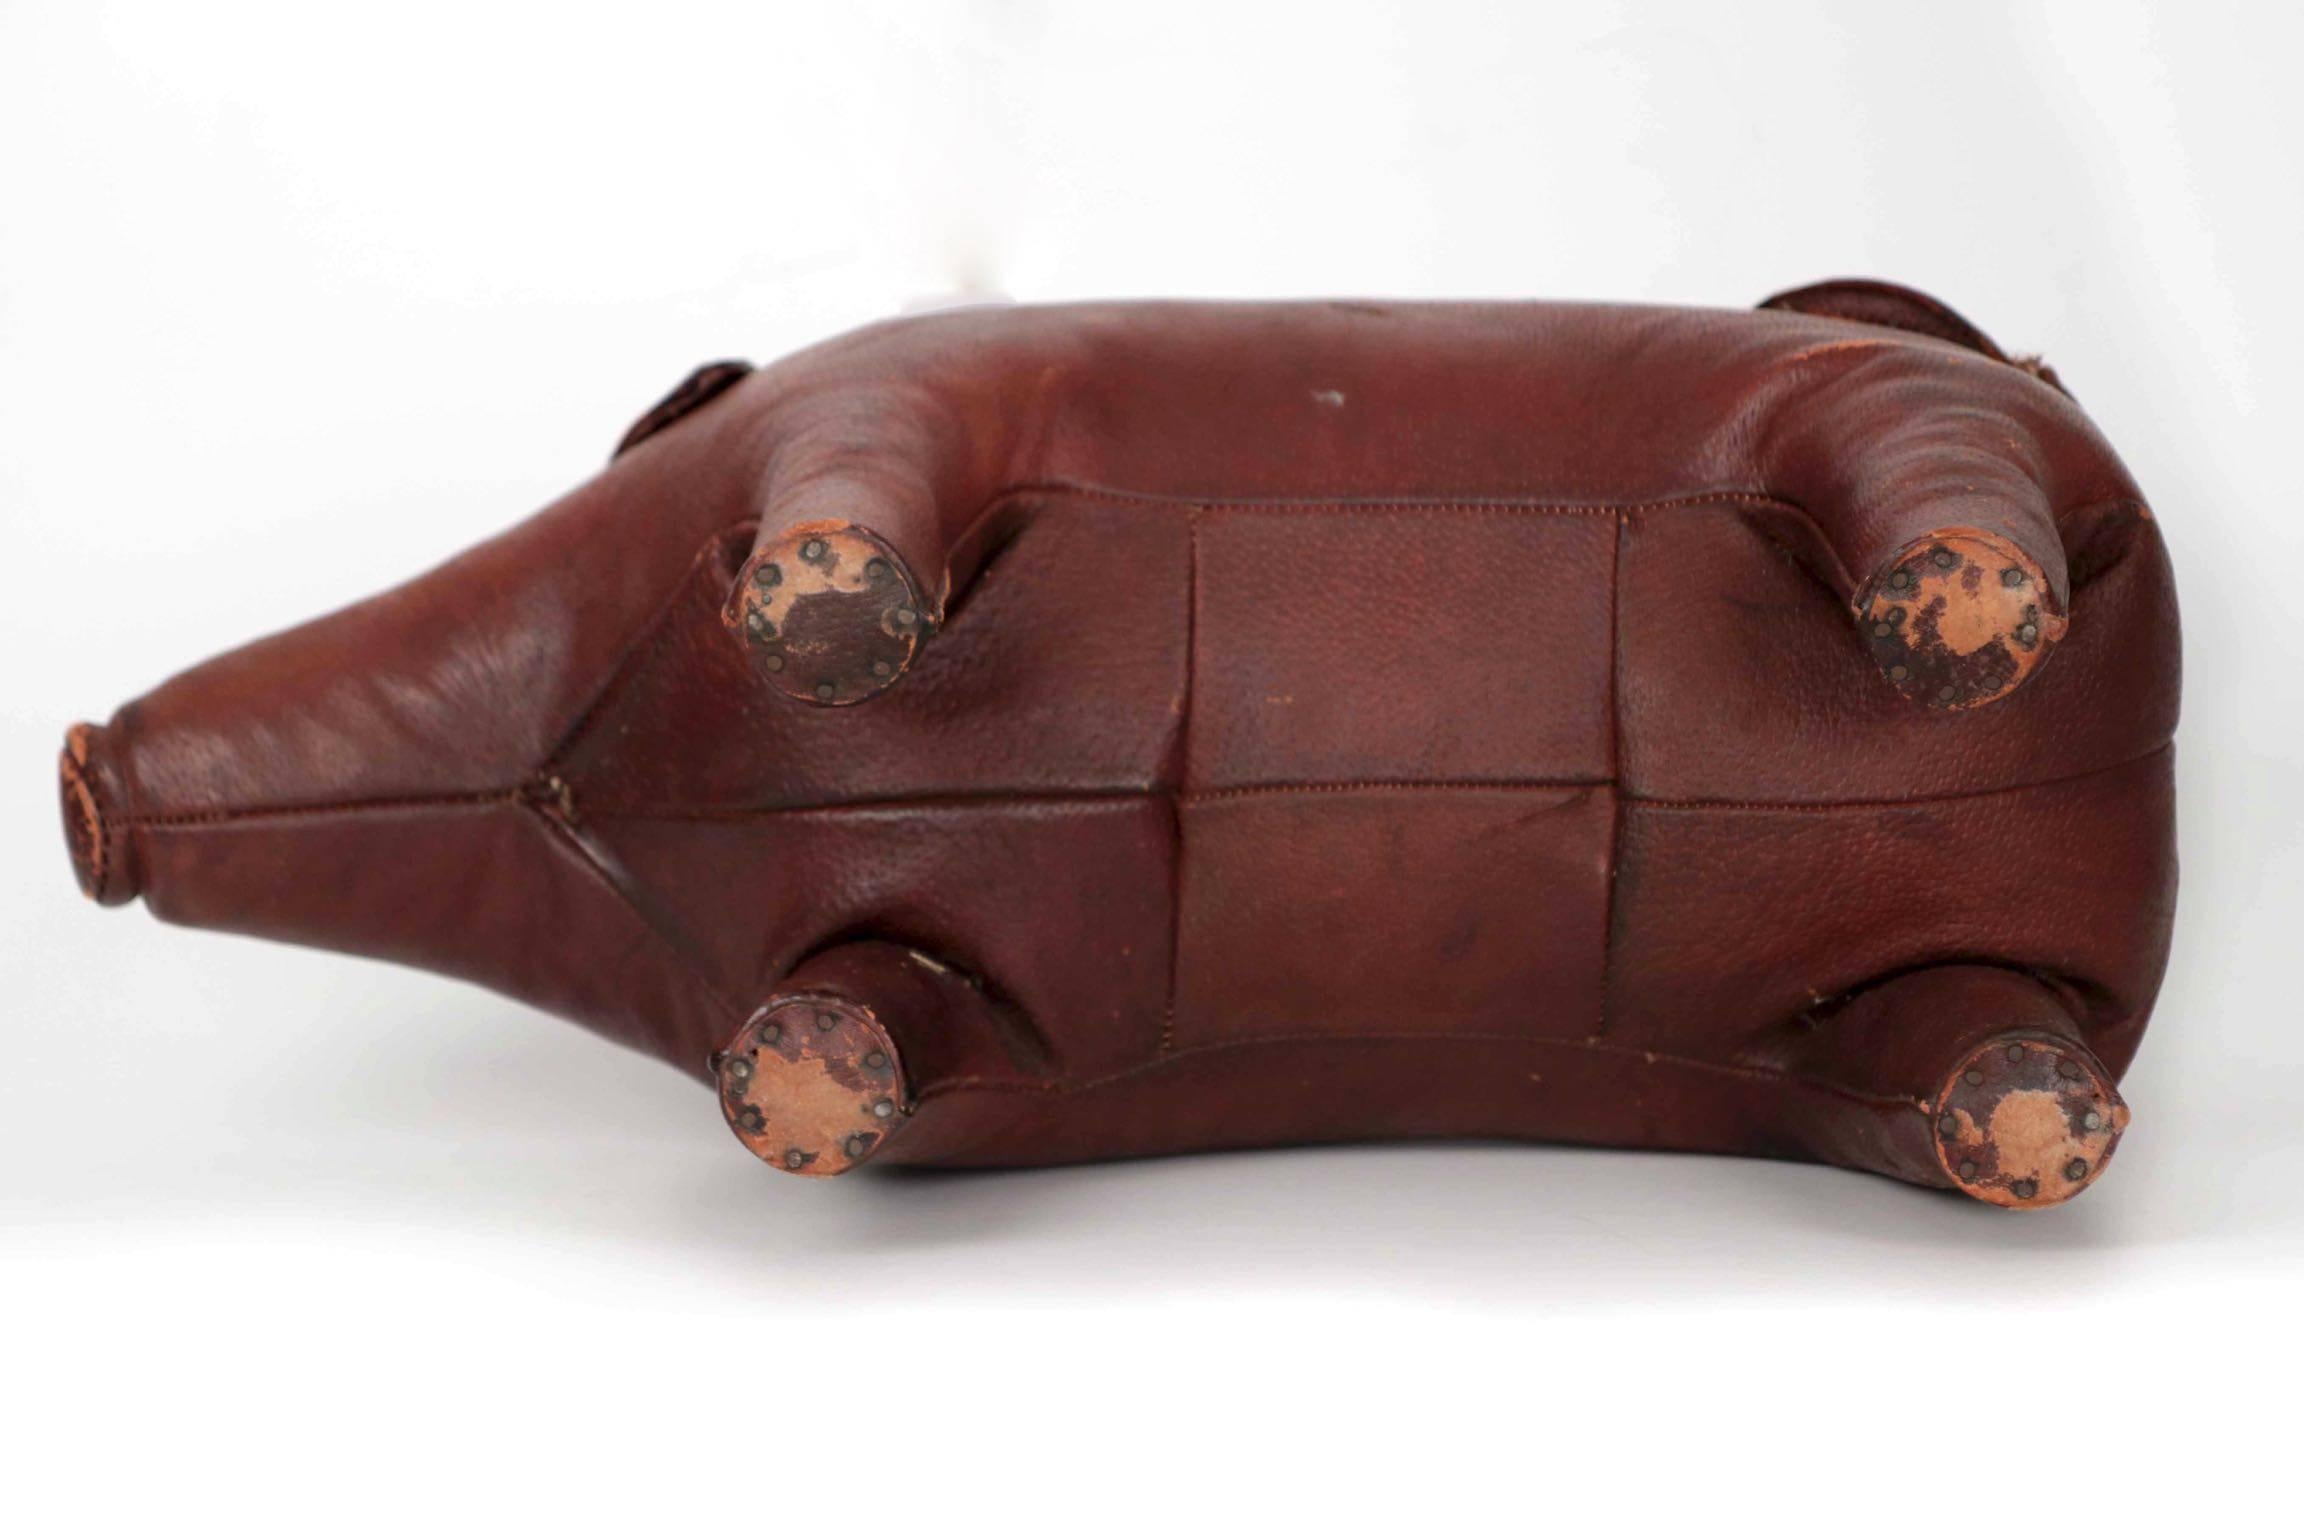 Stitched Leather Pig Footstool Ottoman by Dimitri Osmera for Abercrombie & Fitch 2